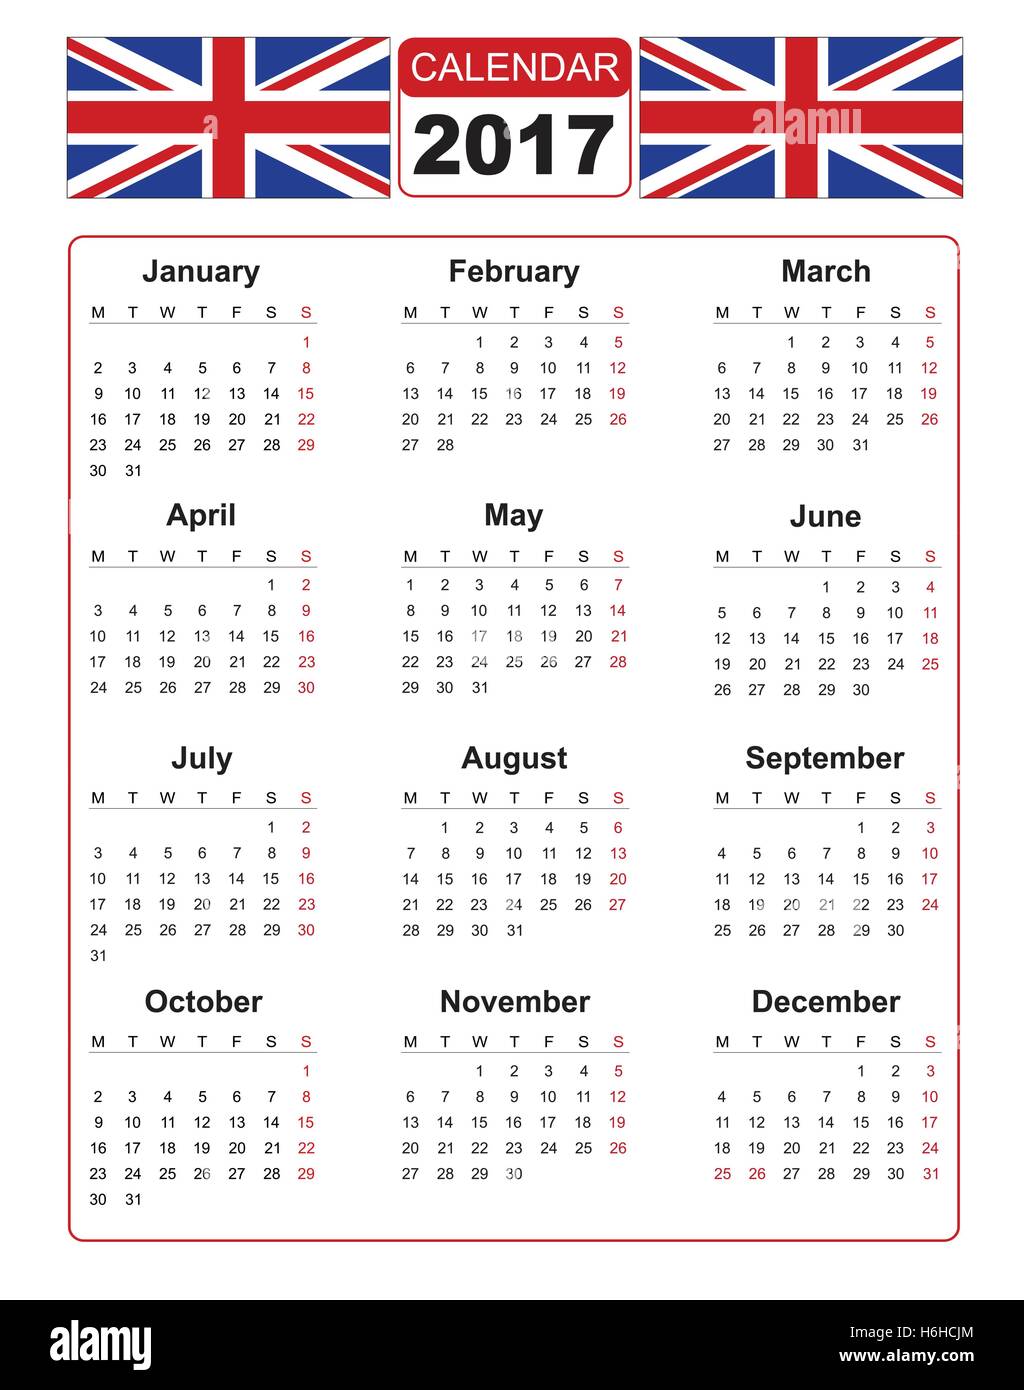 Calendar for 2017 on white background with two vector image of united kindom flag. Vector EPS10. Stock Vector